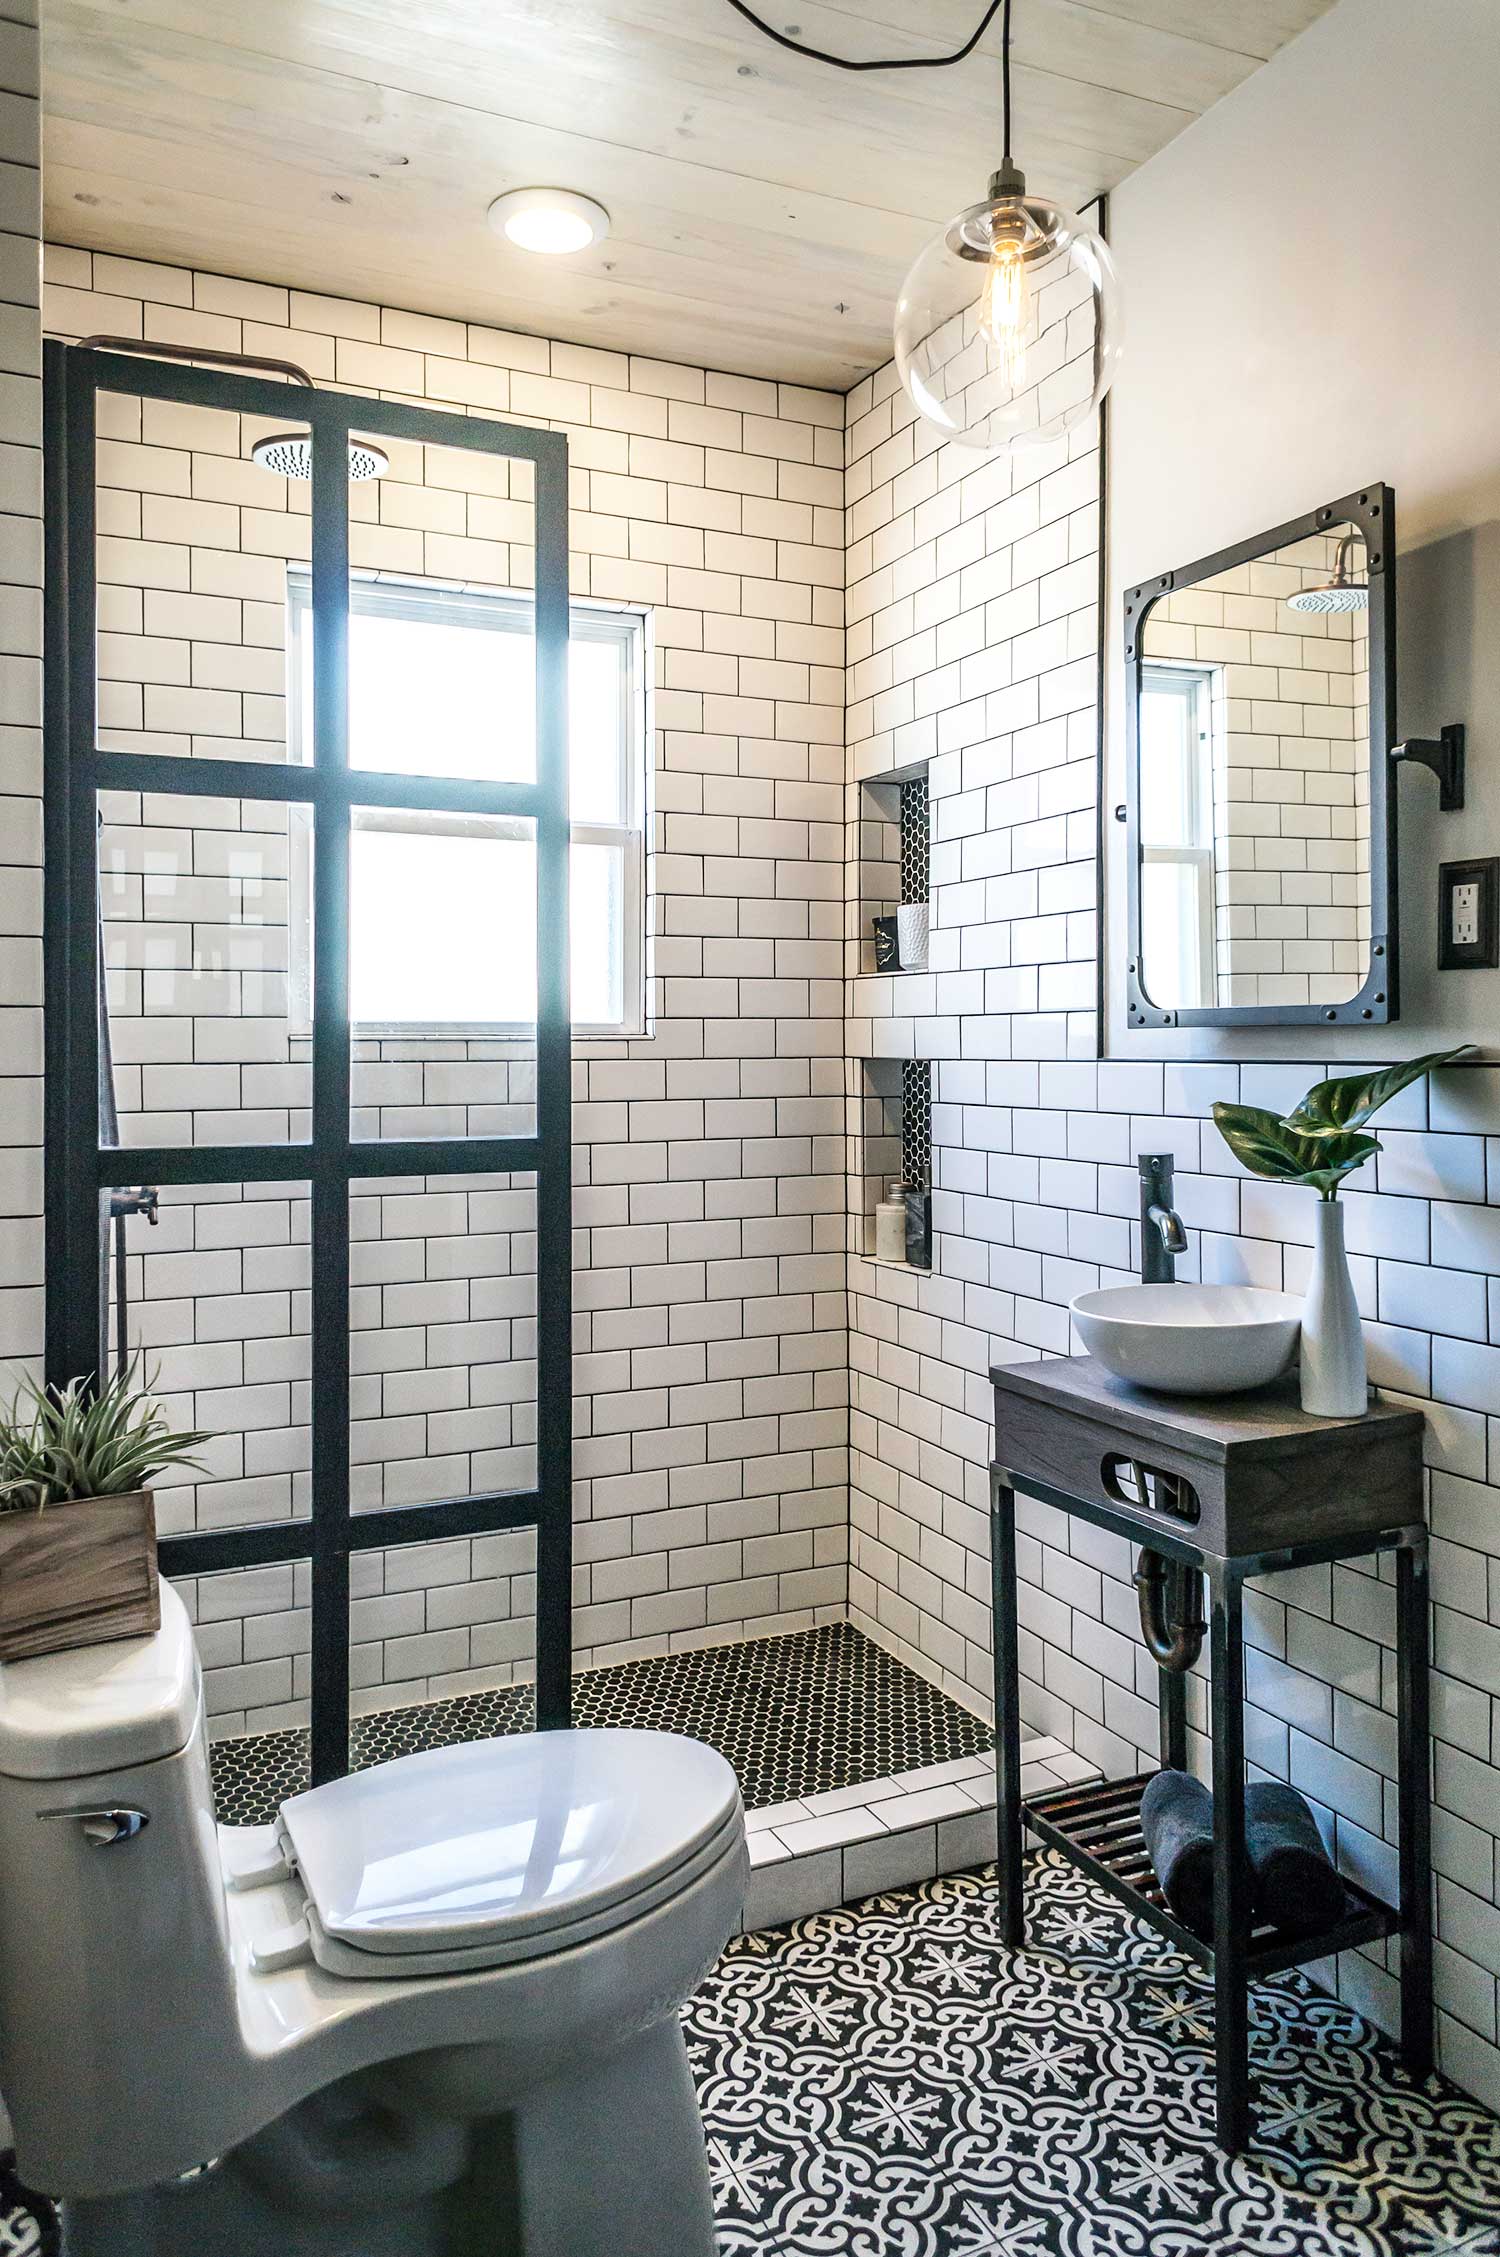 31 Small Bathroom Design Ideas To Get Inspired